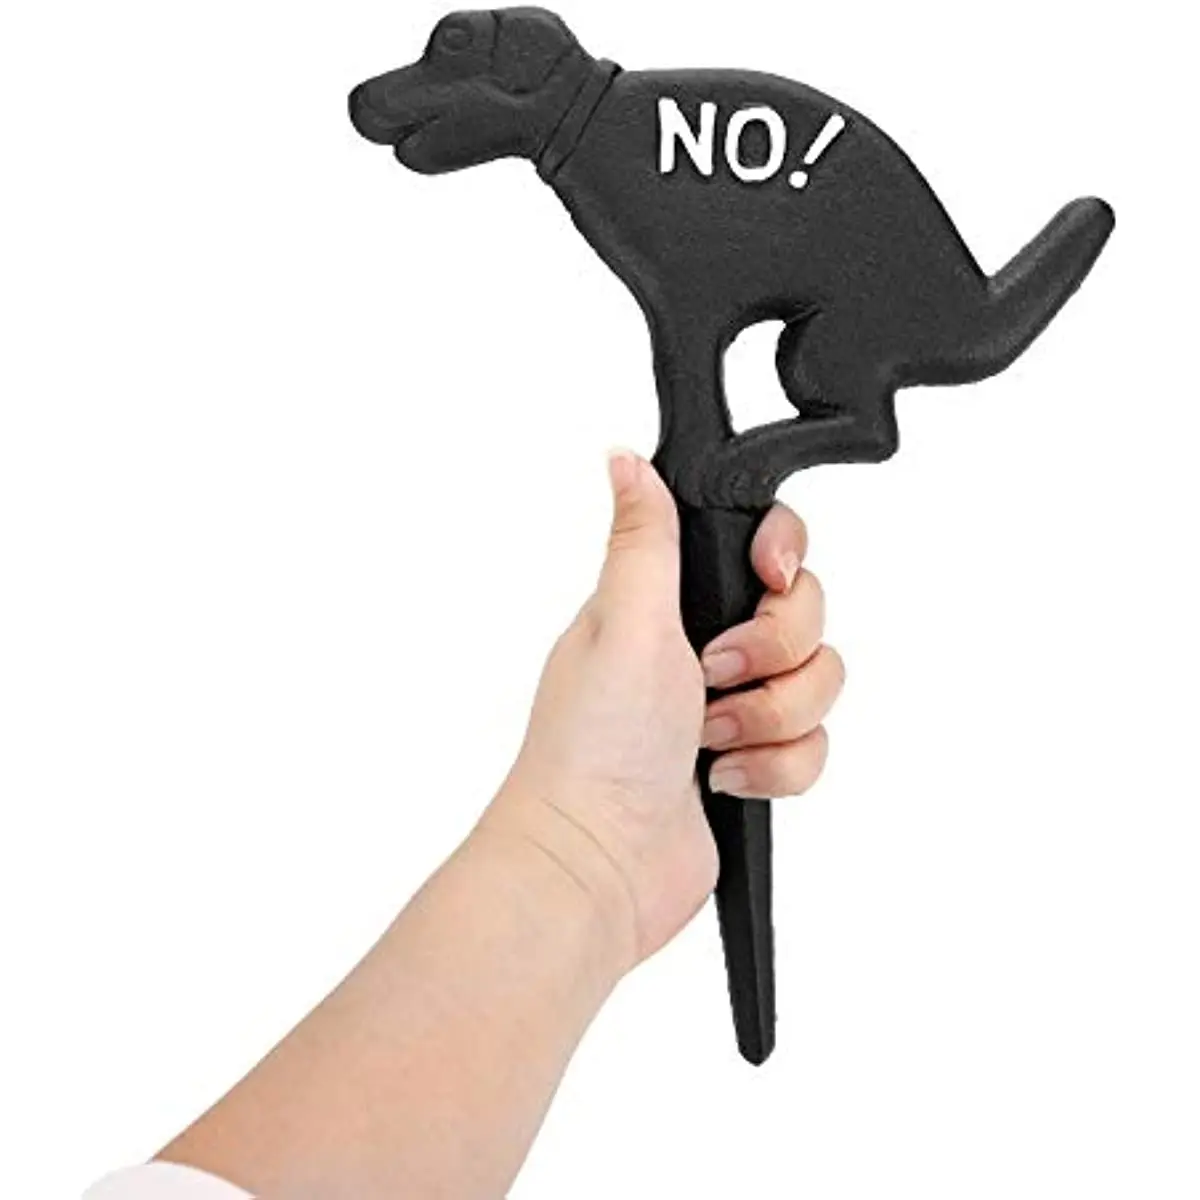 Iron No Pooping Yard Sign Stake, No Dog Allowed Poop Spike Garden Hose  Guides Decorative Stake for Garden Lawn Yard - AliExpress